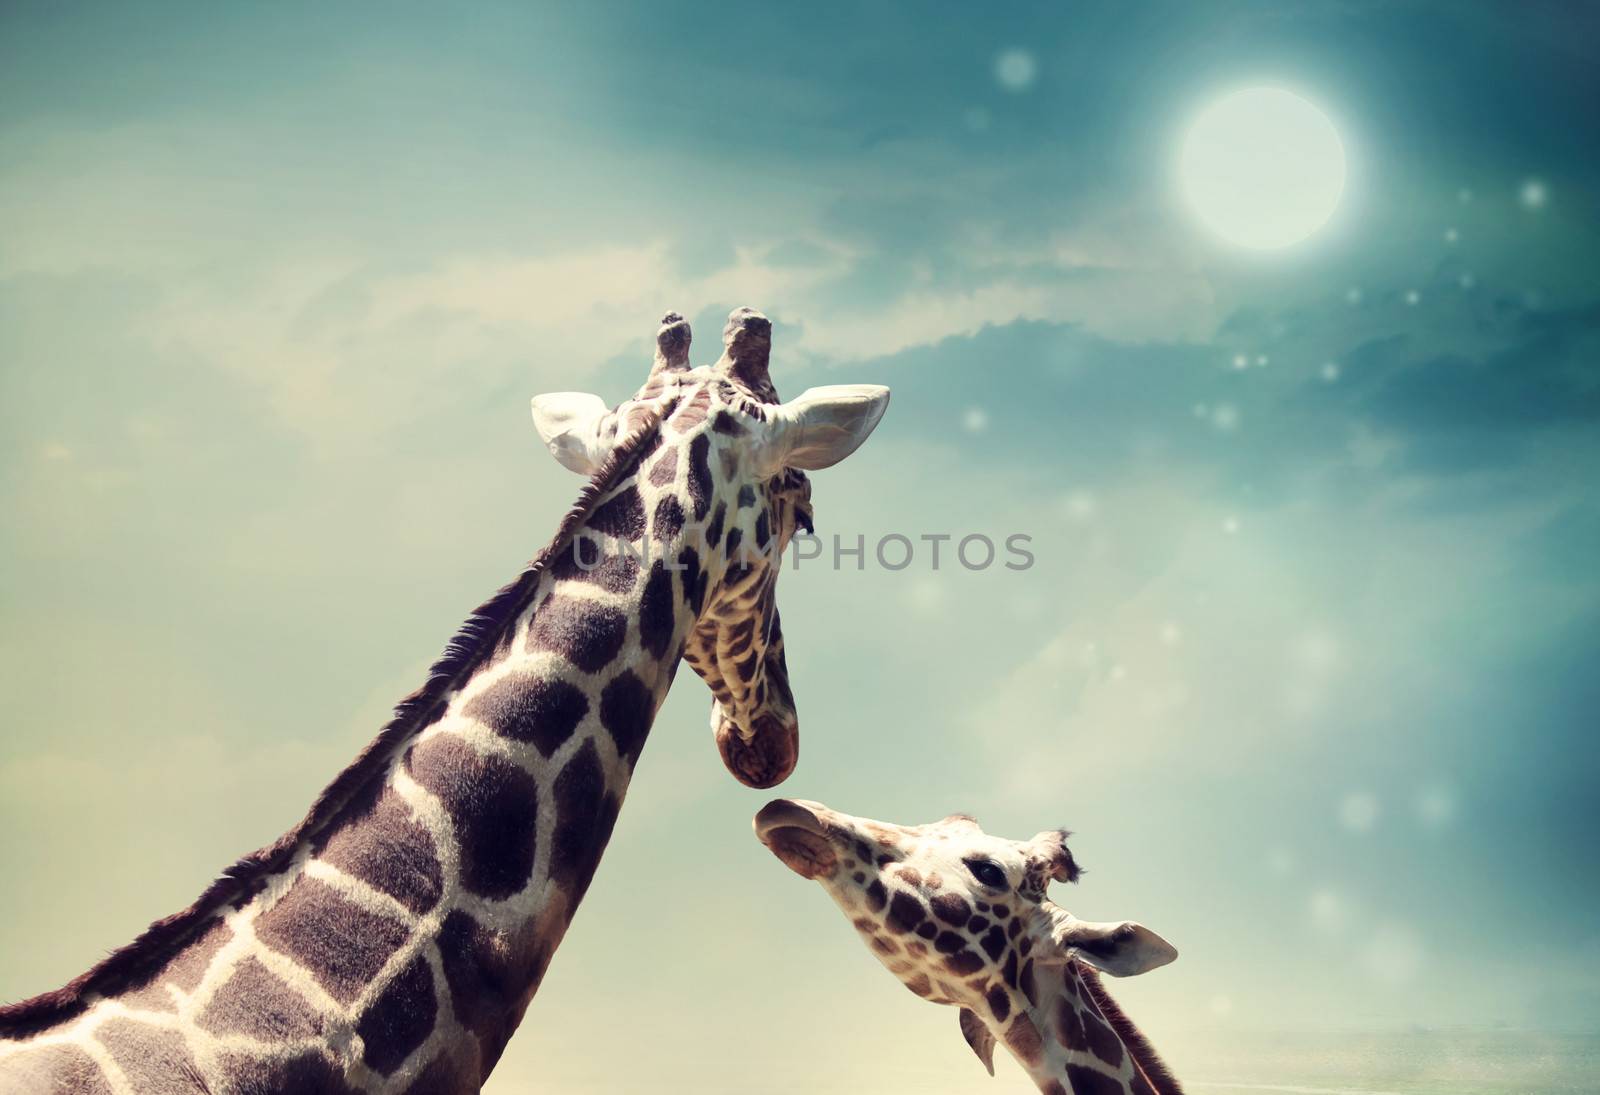 Two Giraffes, mother and child in friendship or love theme image at twilight